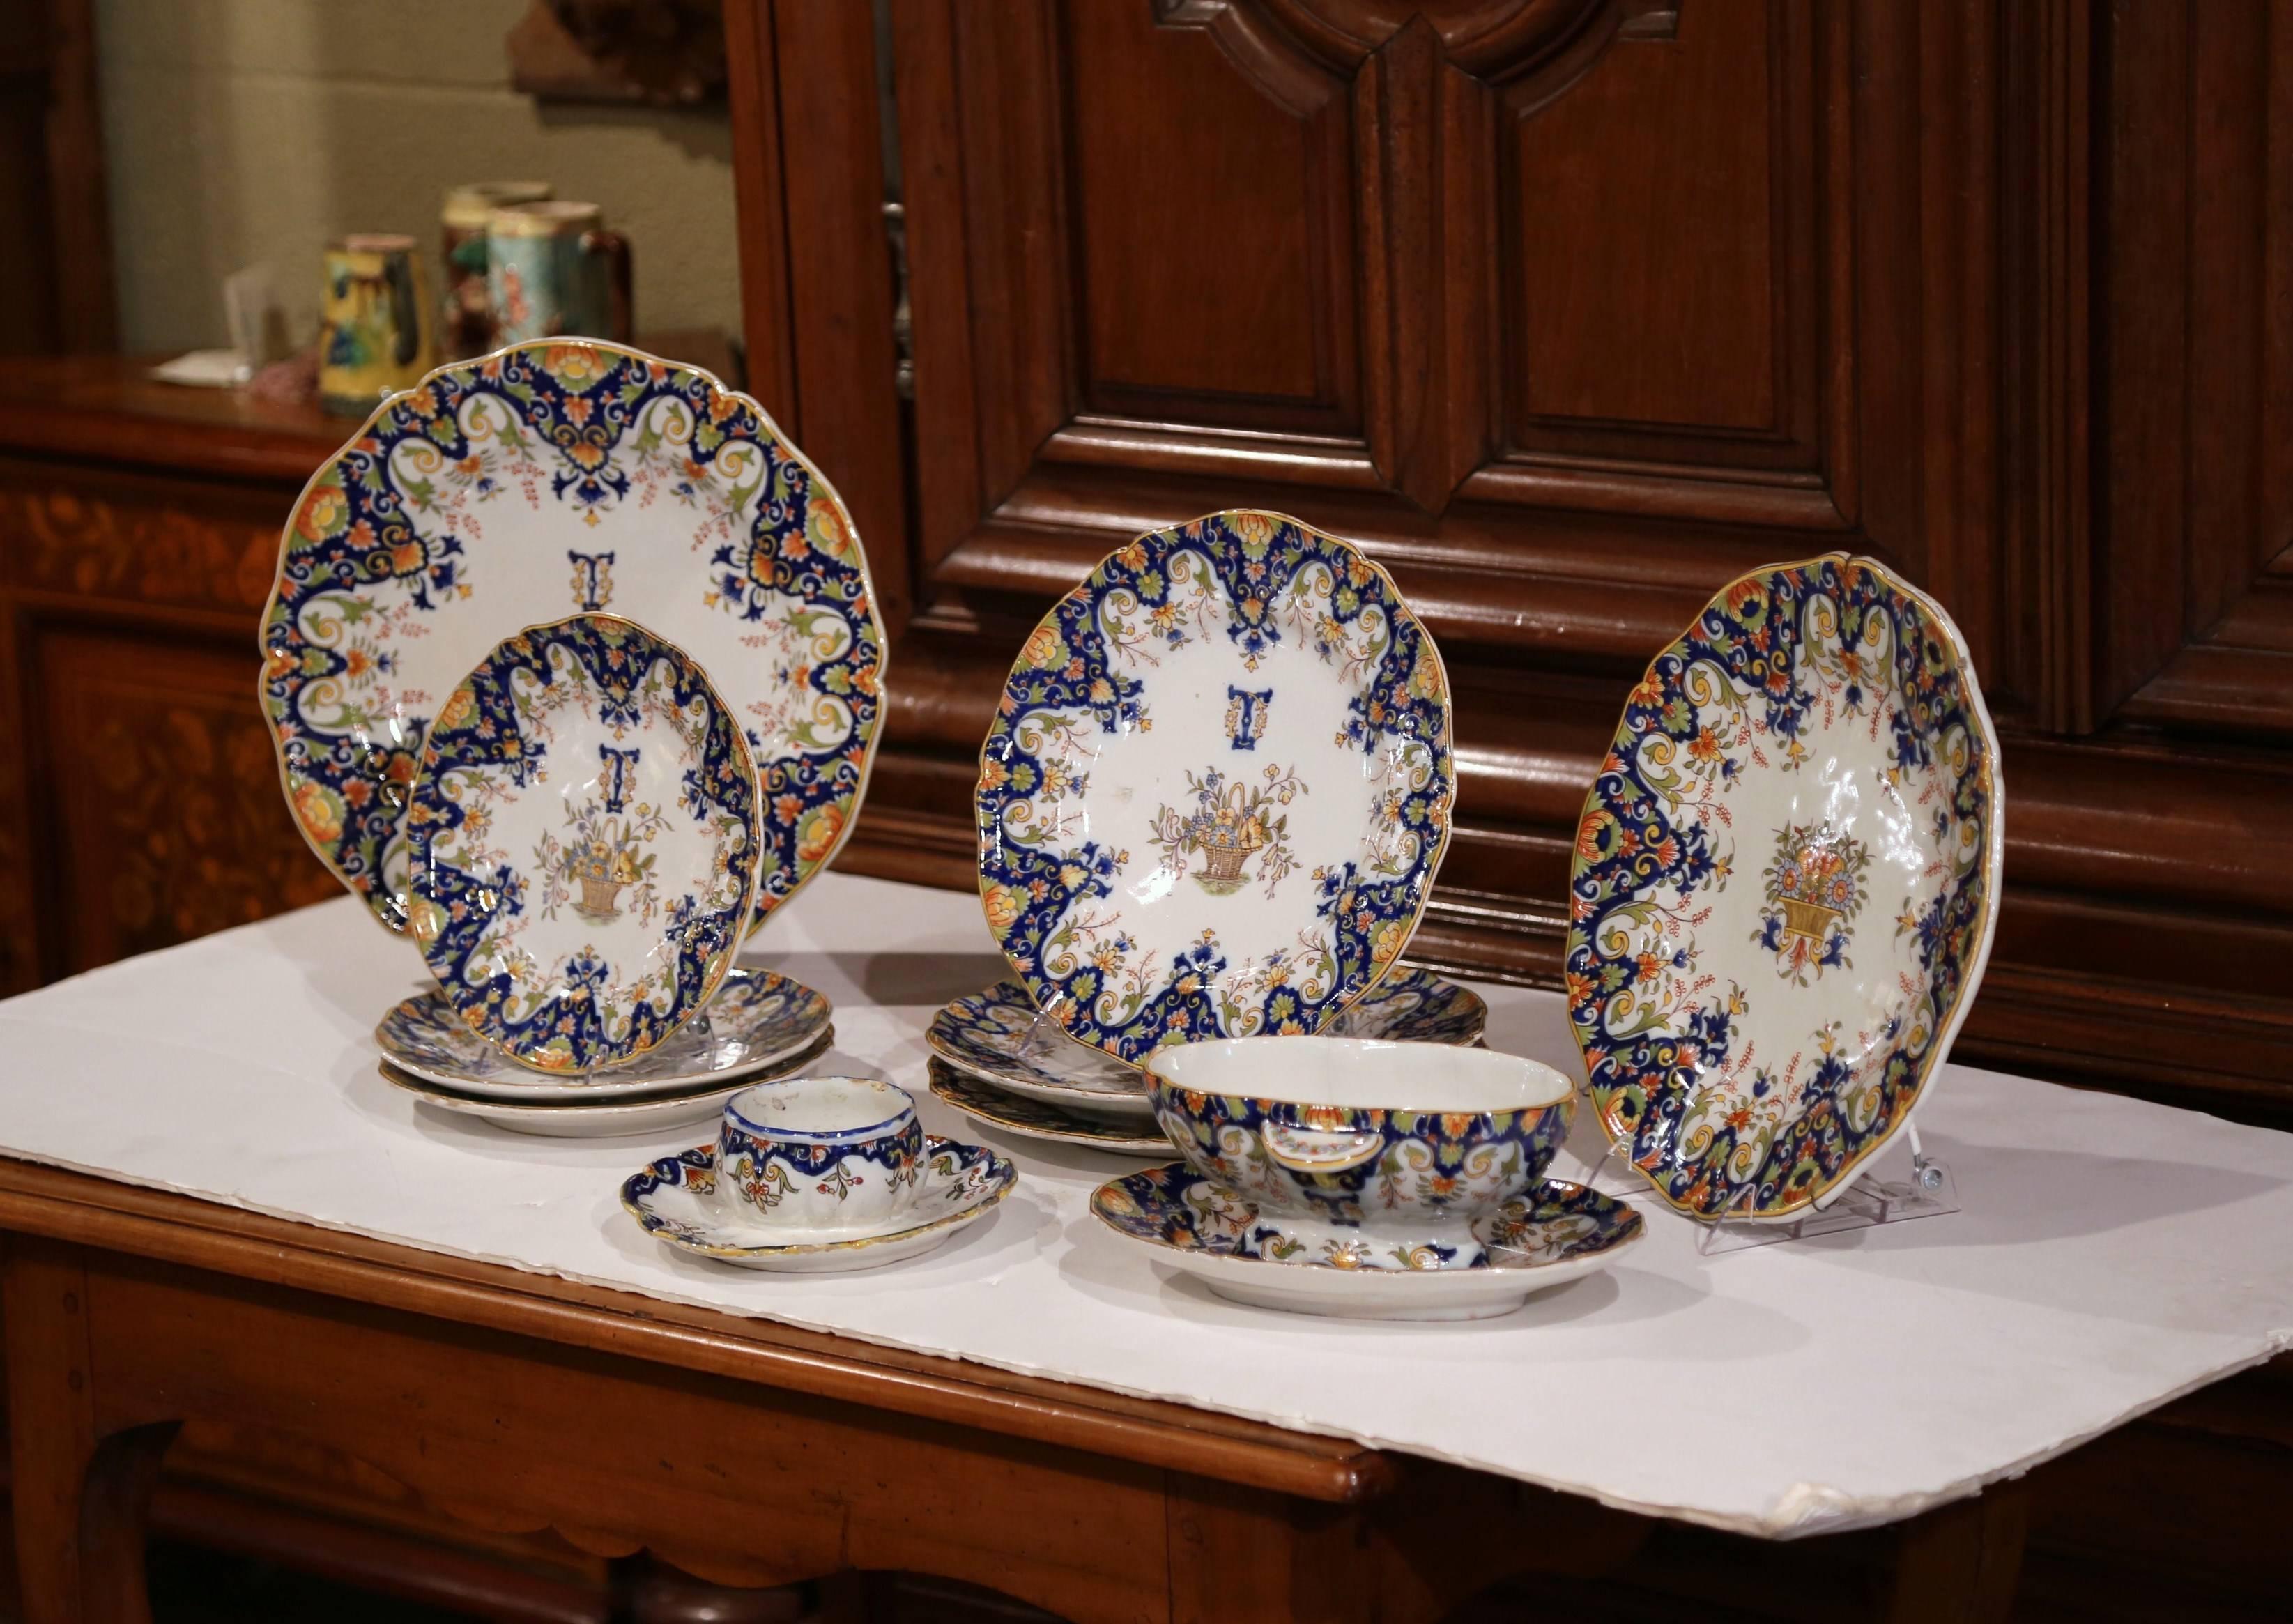 Colorful set of antique wall dishes from Rouen, France, handcrafted, circa 1880, the set includes two large wall hanging platters, six smaller plates, a candleholder and a small bowl. Each ceramic piece features hand painted floral decor in the blue